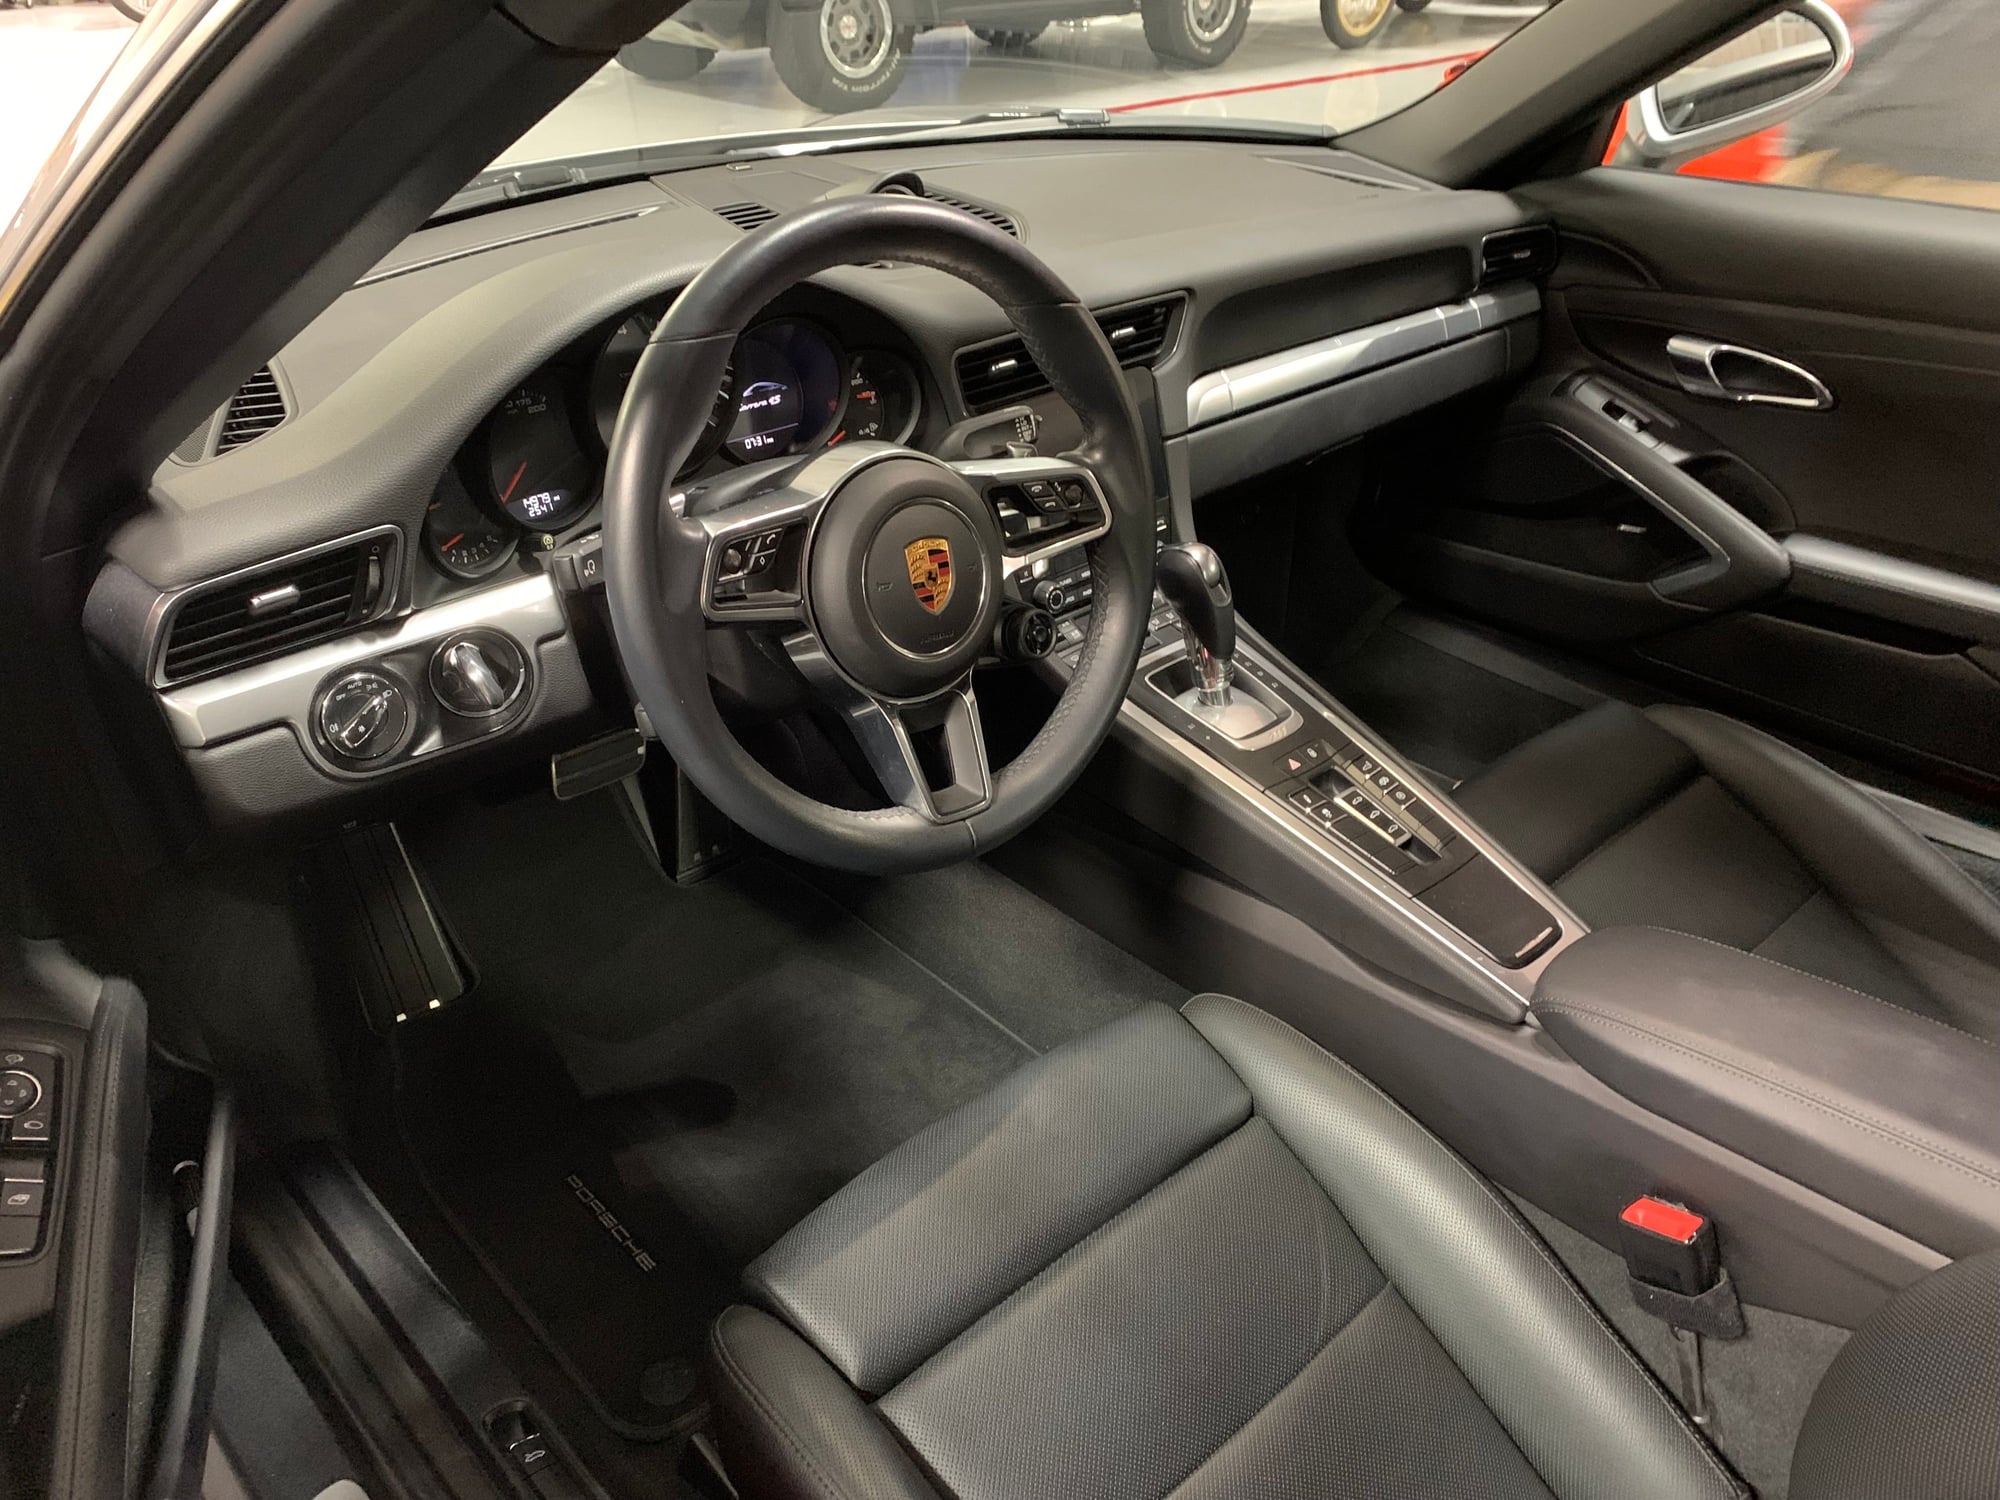 2018 Porsche 911 - Pristine 2018 C4S looking for someone to love her and drive her to her limits. - New - VIN WP0AB2A93JS122655 - 14,700 Miles - 6 cyl - 4WD - Automatic - Coupe - Silver - Indianapolis, IN 46203, United States